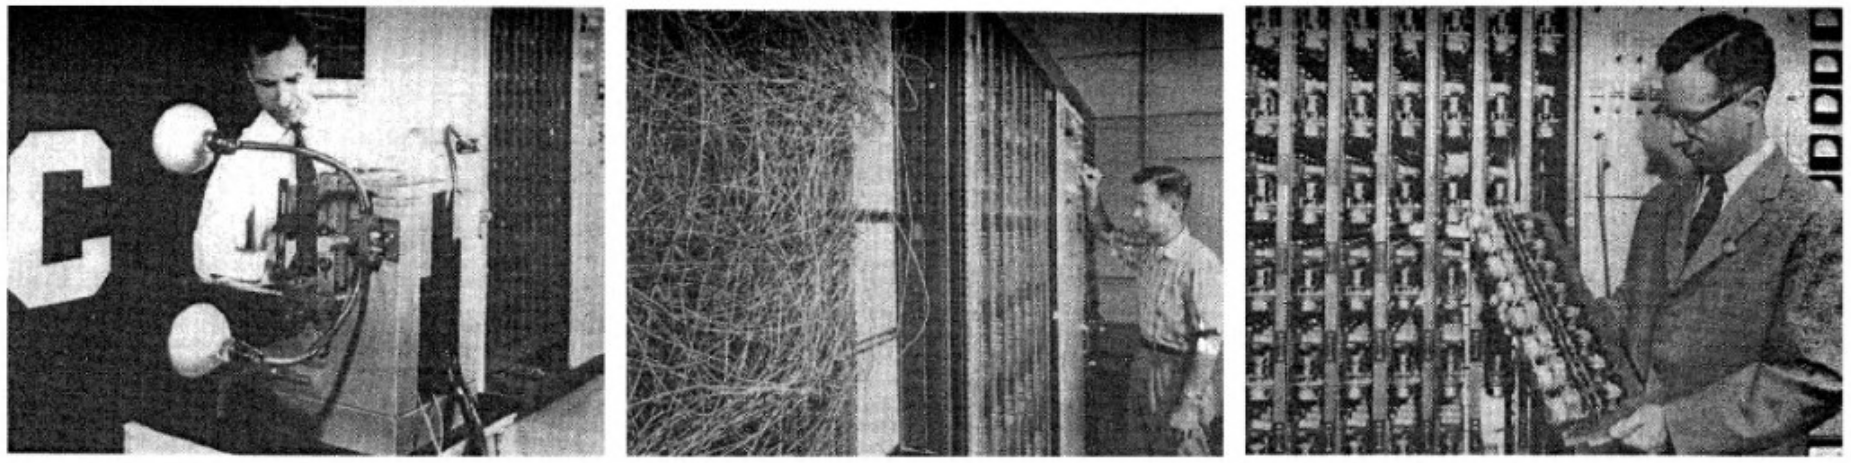 A physical network of perceptrons (1960s Cornell)